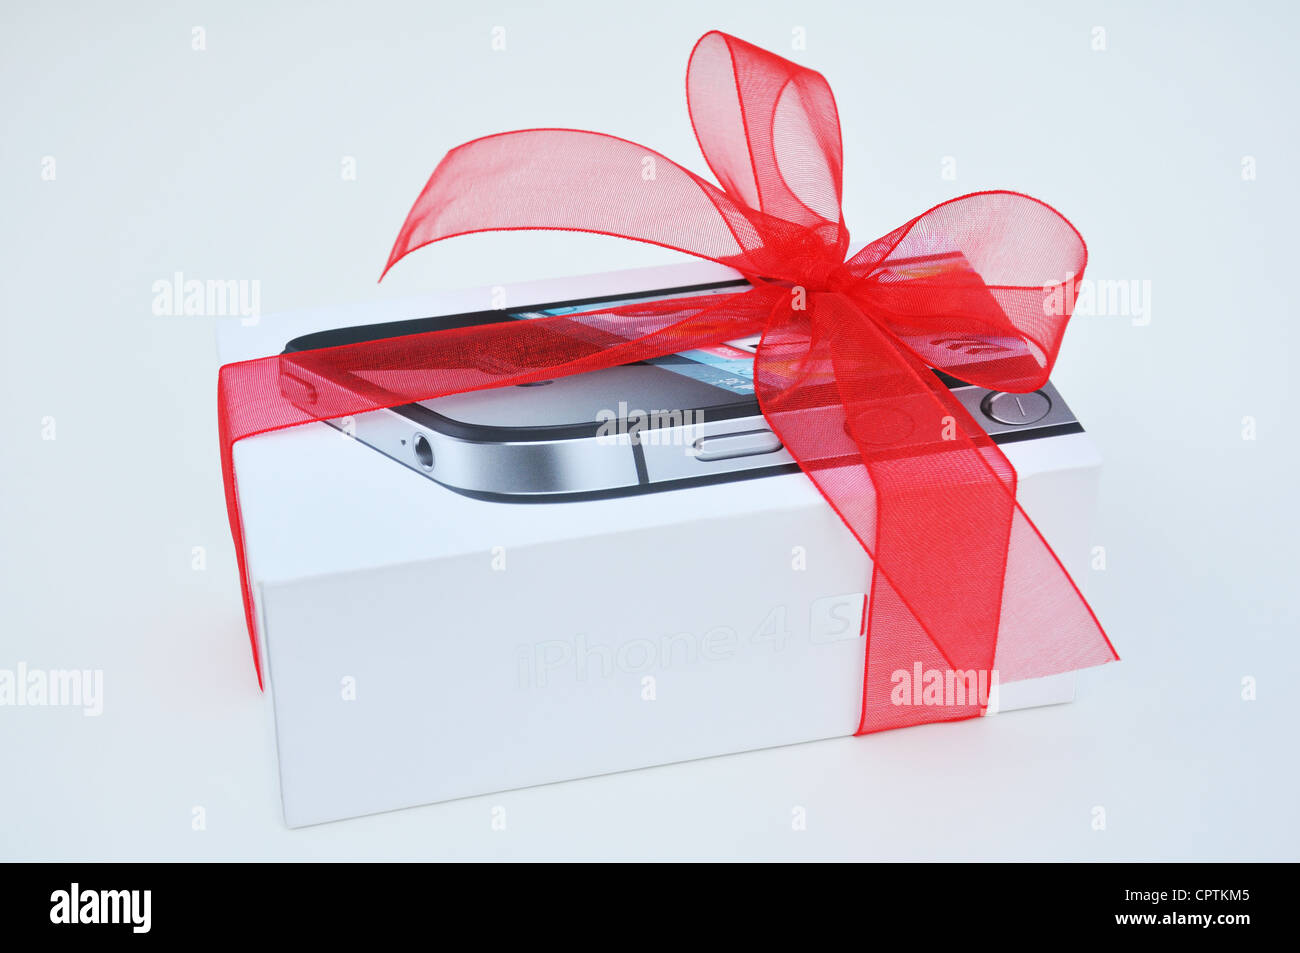 iPhone gift wrapped Stock Photo